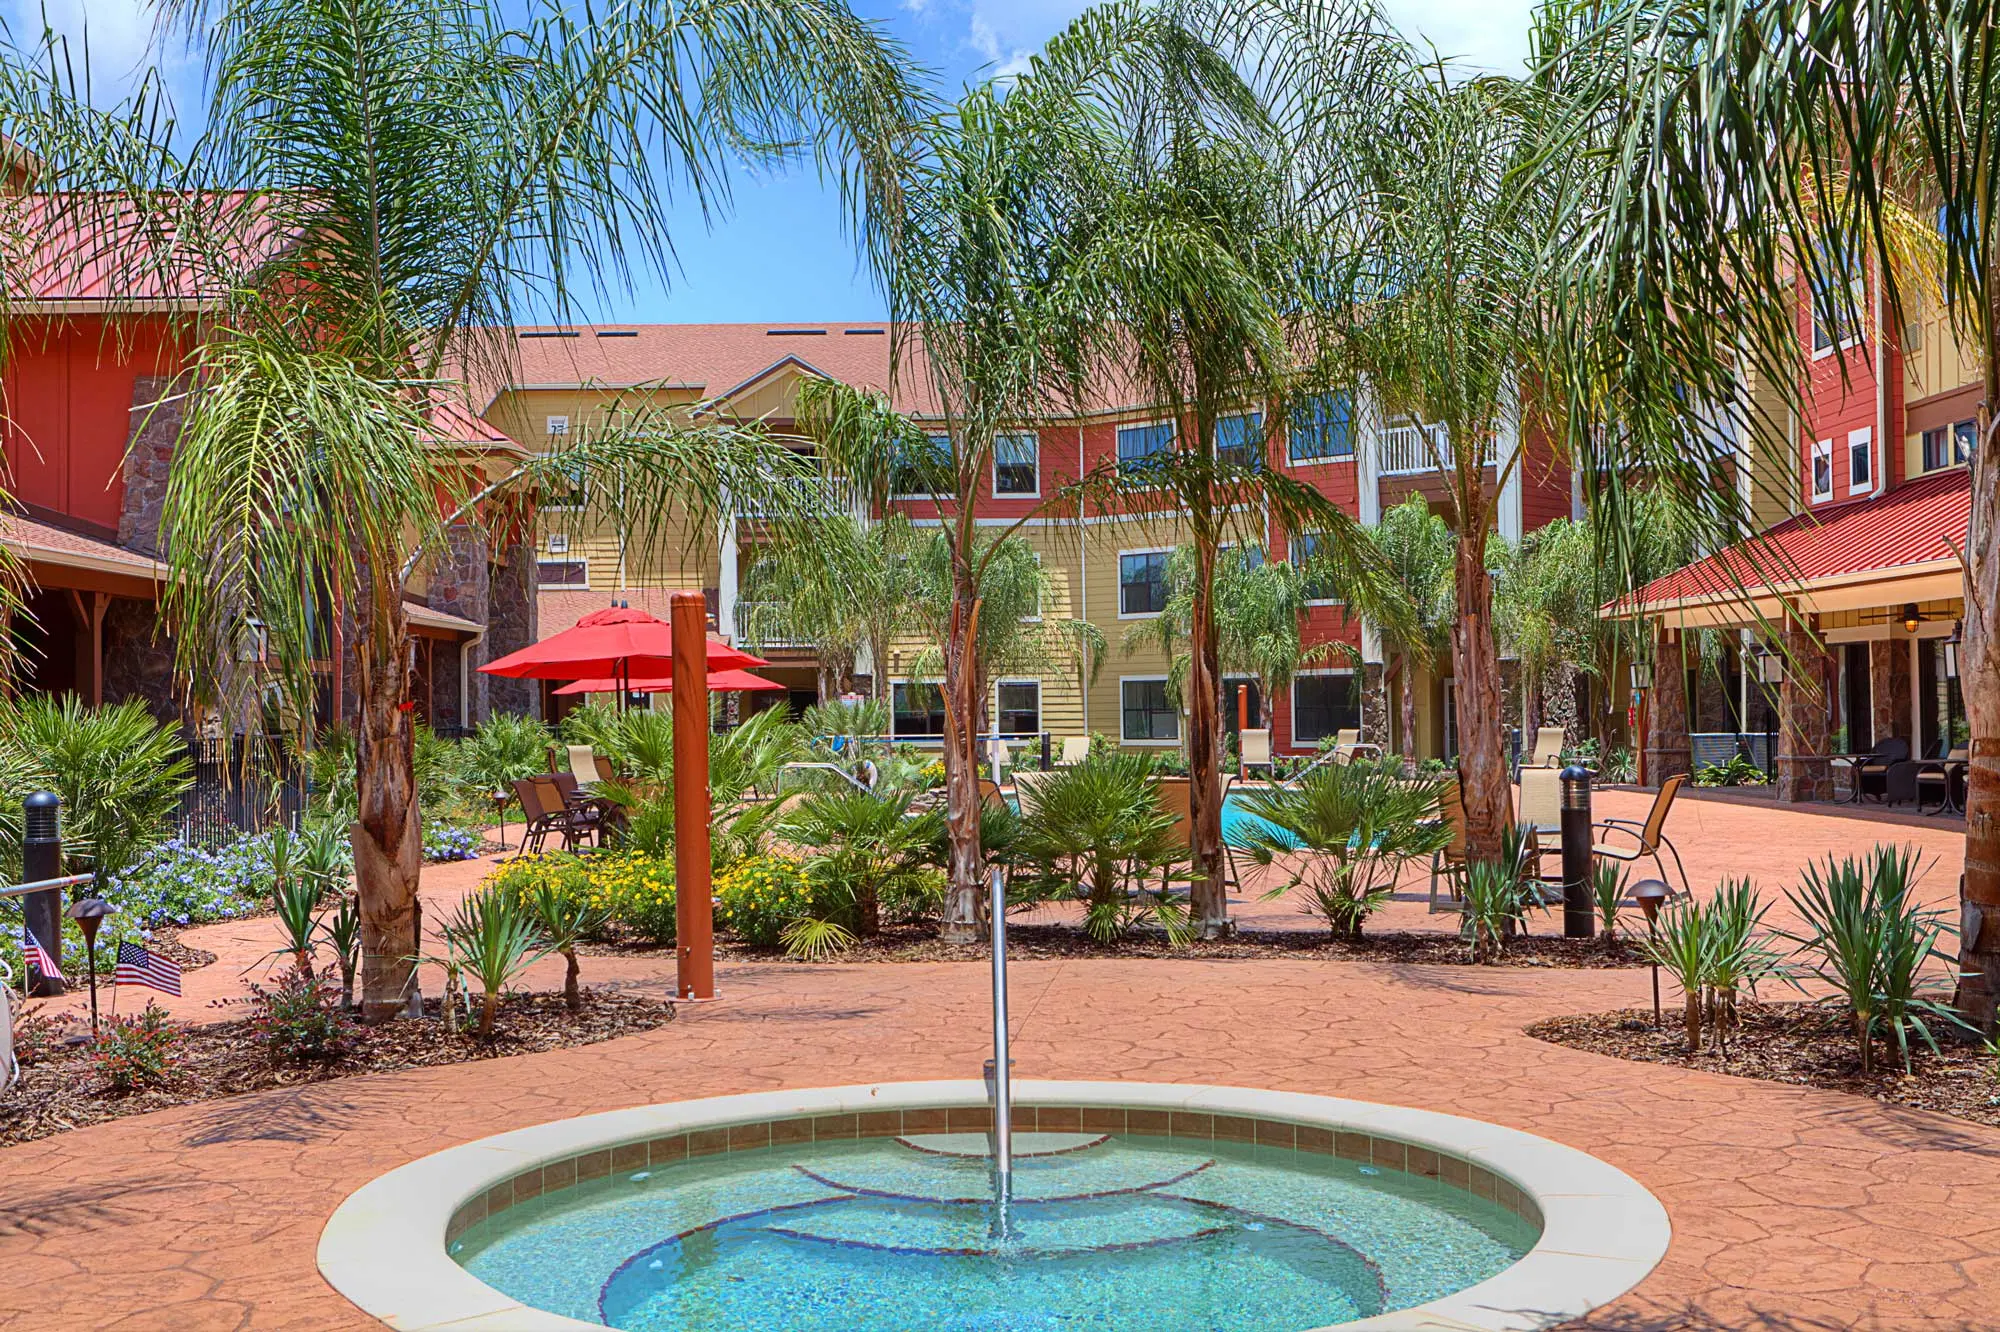 A hot tub surrounded by palm trees in a retirement home in the Villages in Florida